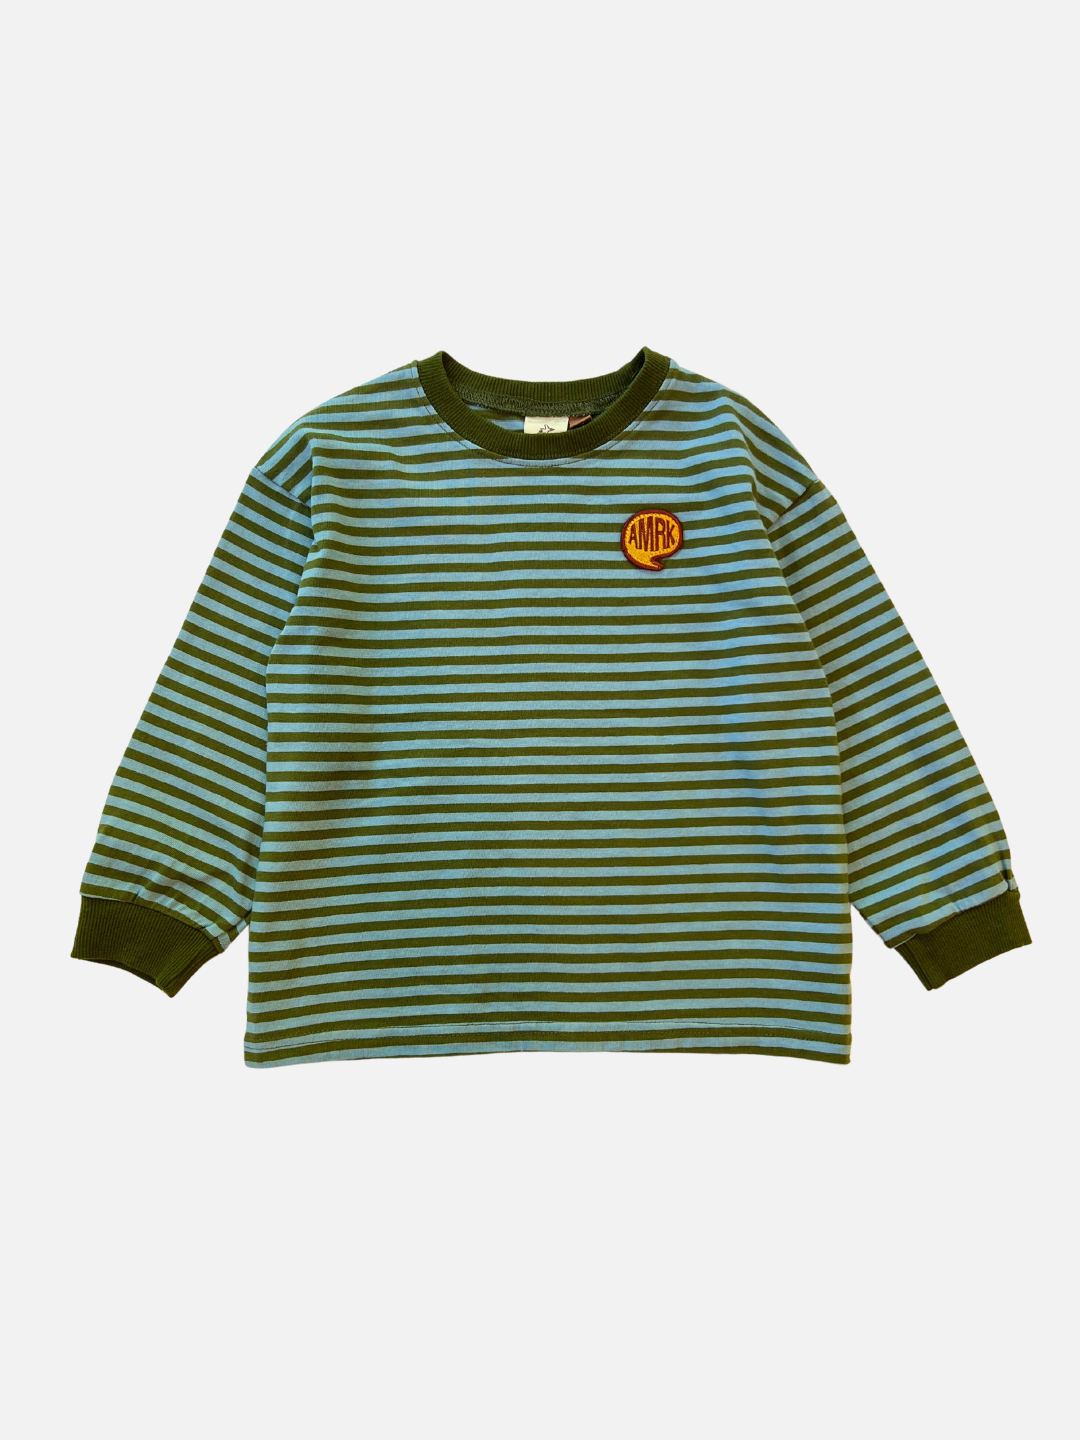 Sky/Olive | Comma Striped Longsleeve in Sky/Olive Front View